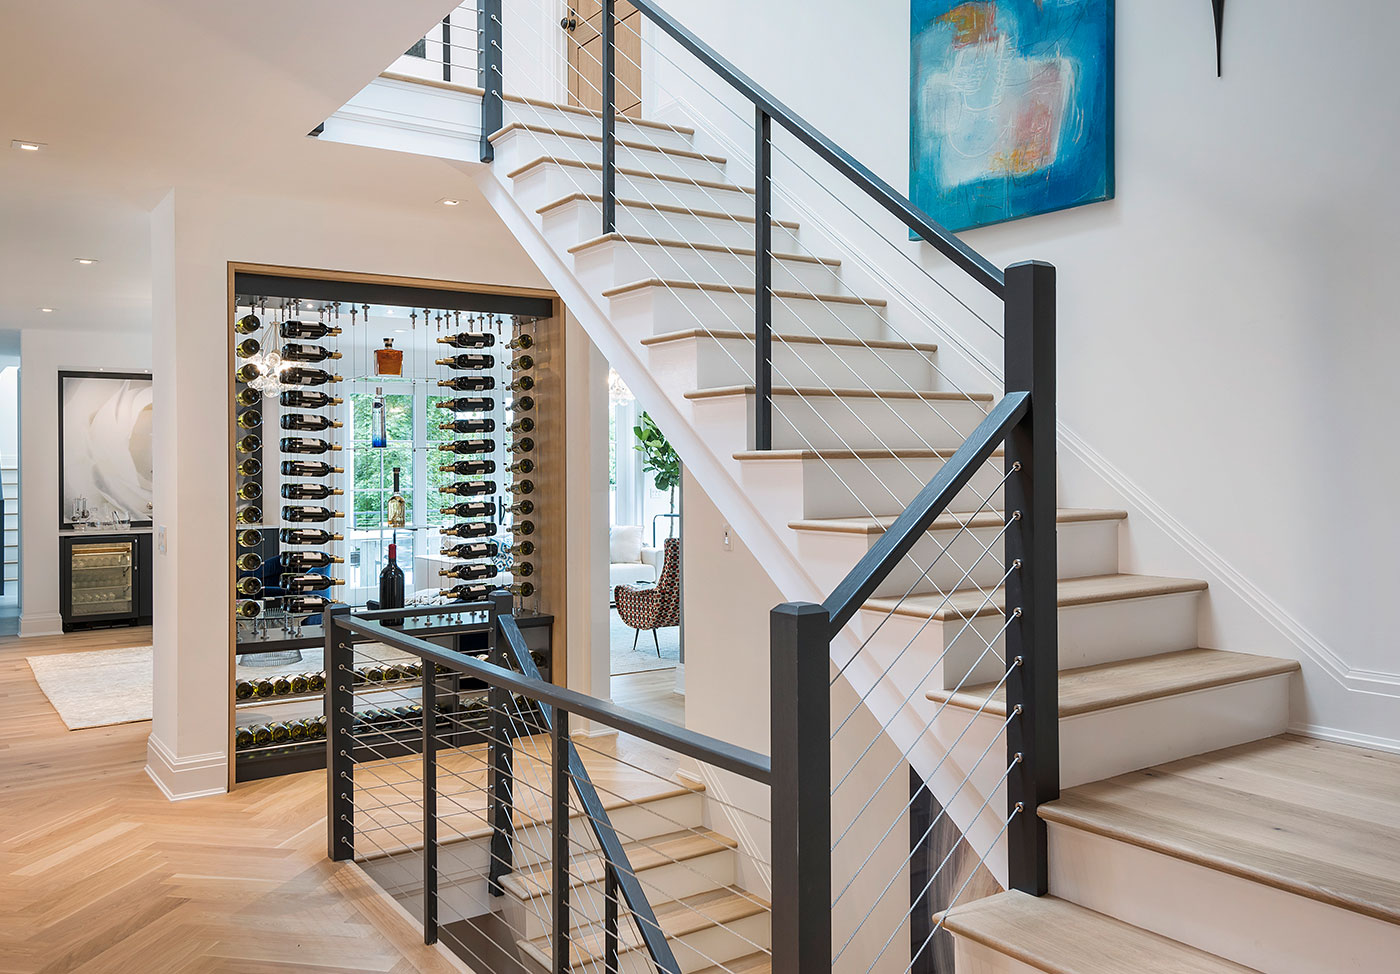 Hardwood floors and three-story staircase.